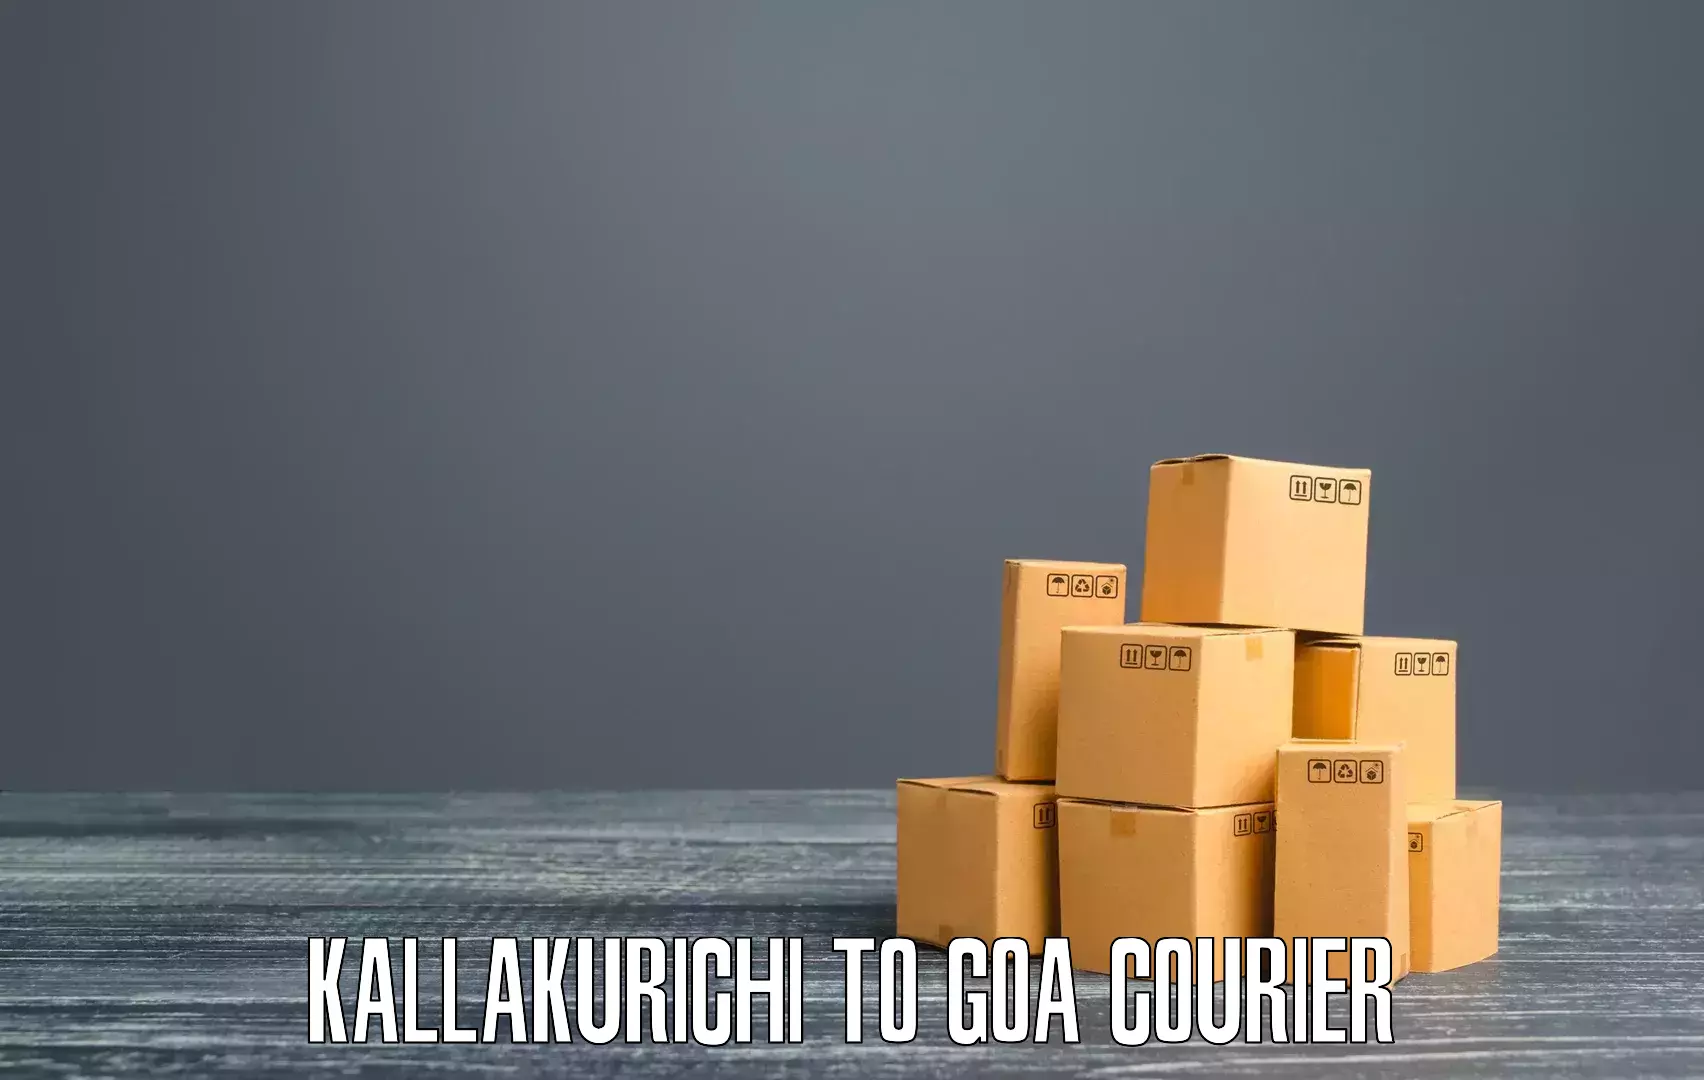 State-of-the-art courier technology Kallakurichi to South Goa